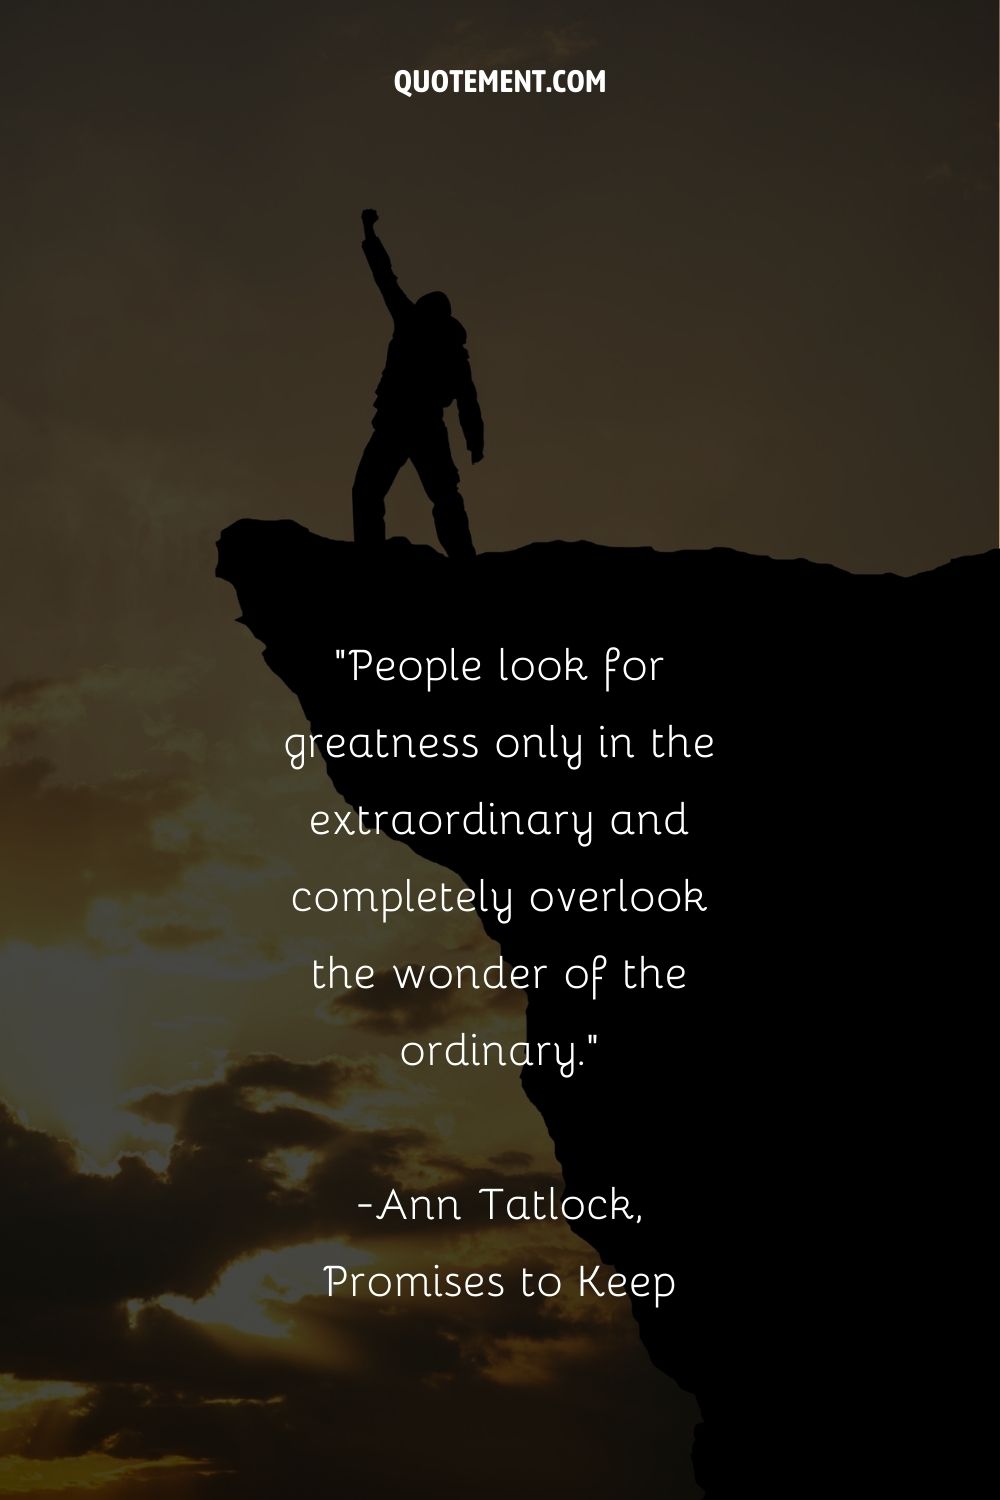 People look for greatness only in the extraordinary